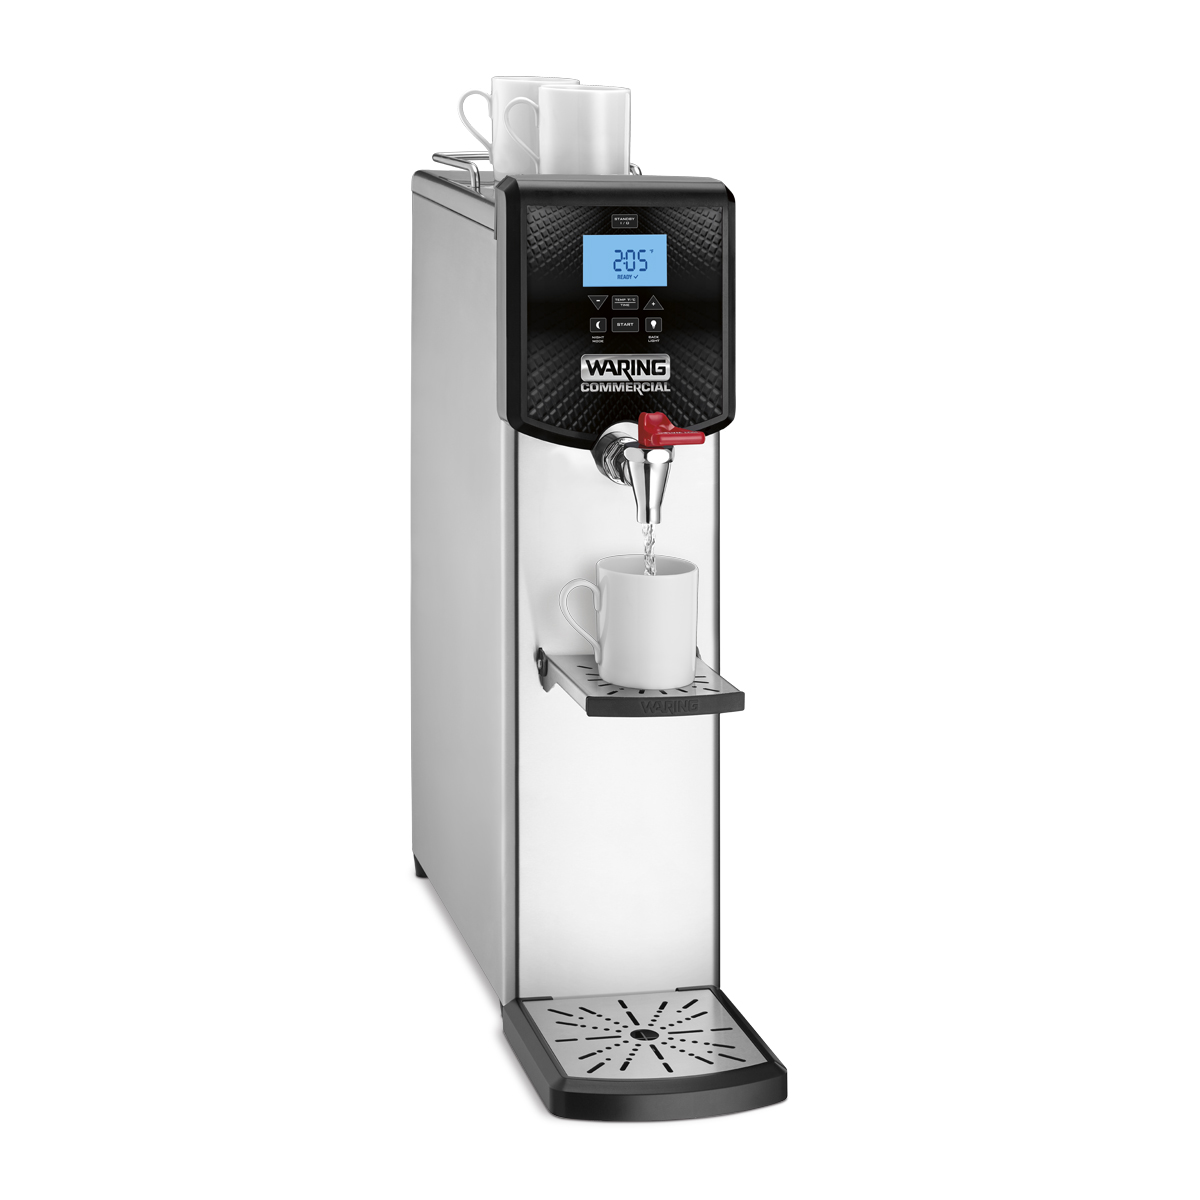 https://www.waringcommercialproducts.com/files/products/wwb5g-waring-commercial-5-gallon-water-dispenser-inset1.jpg